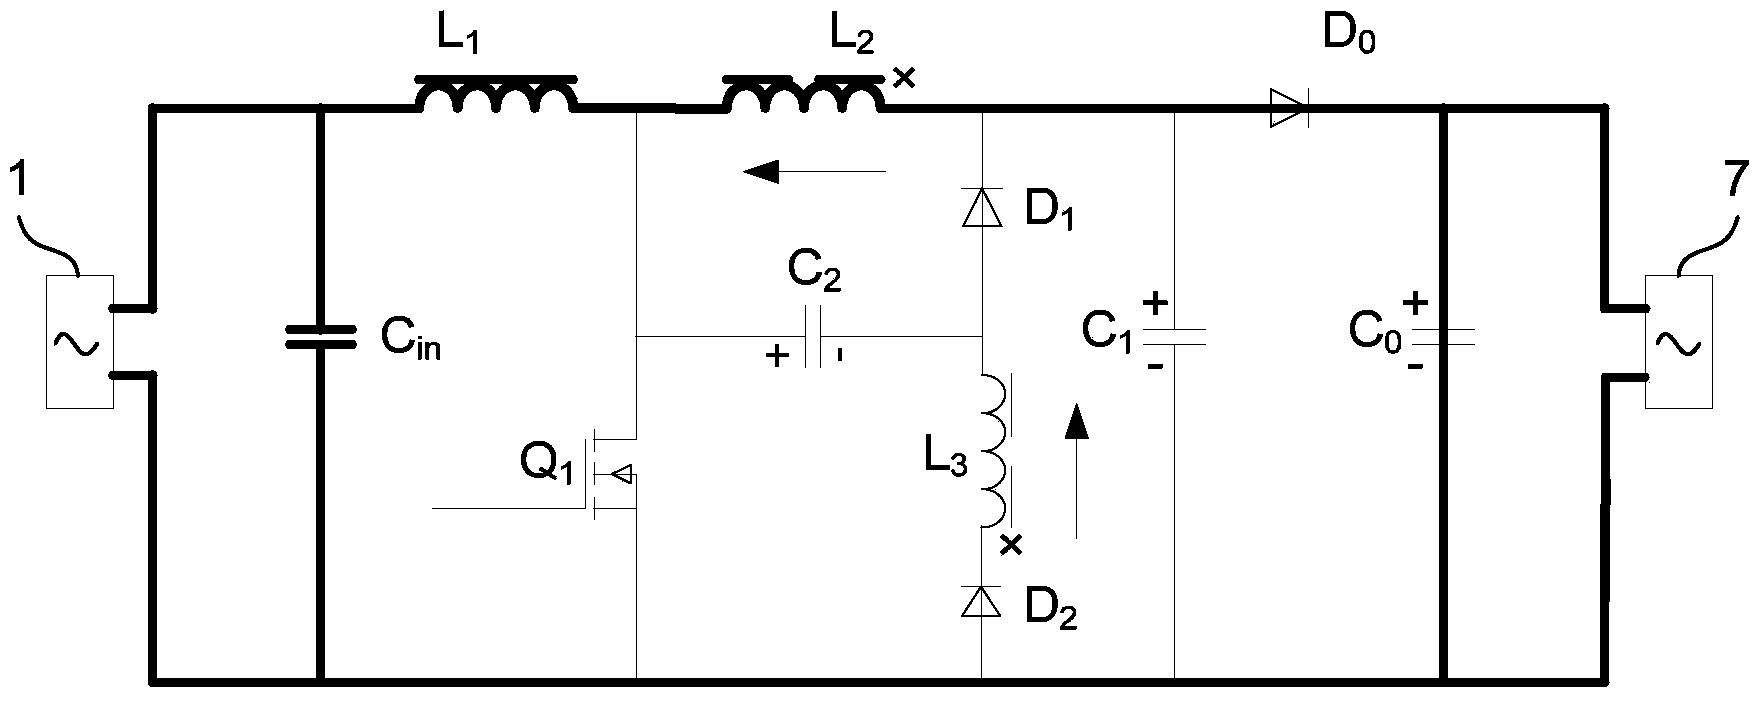 Soft switching Boost topology circuit